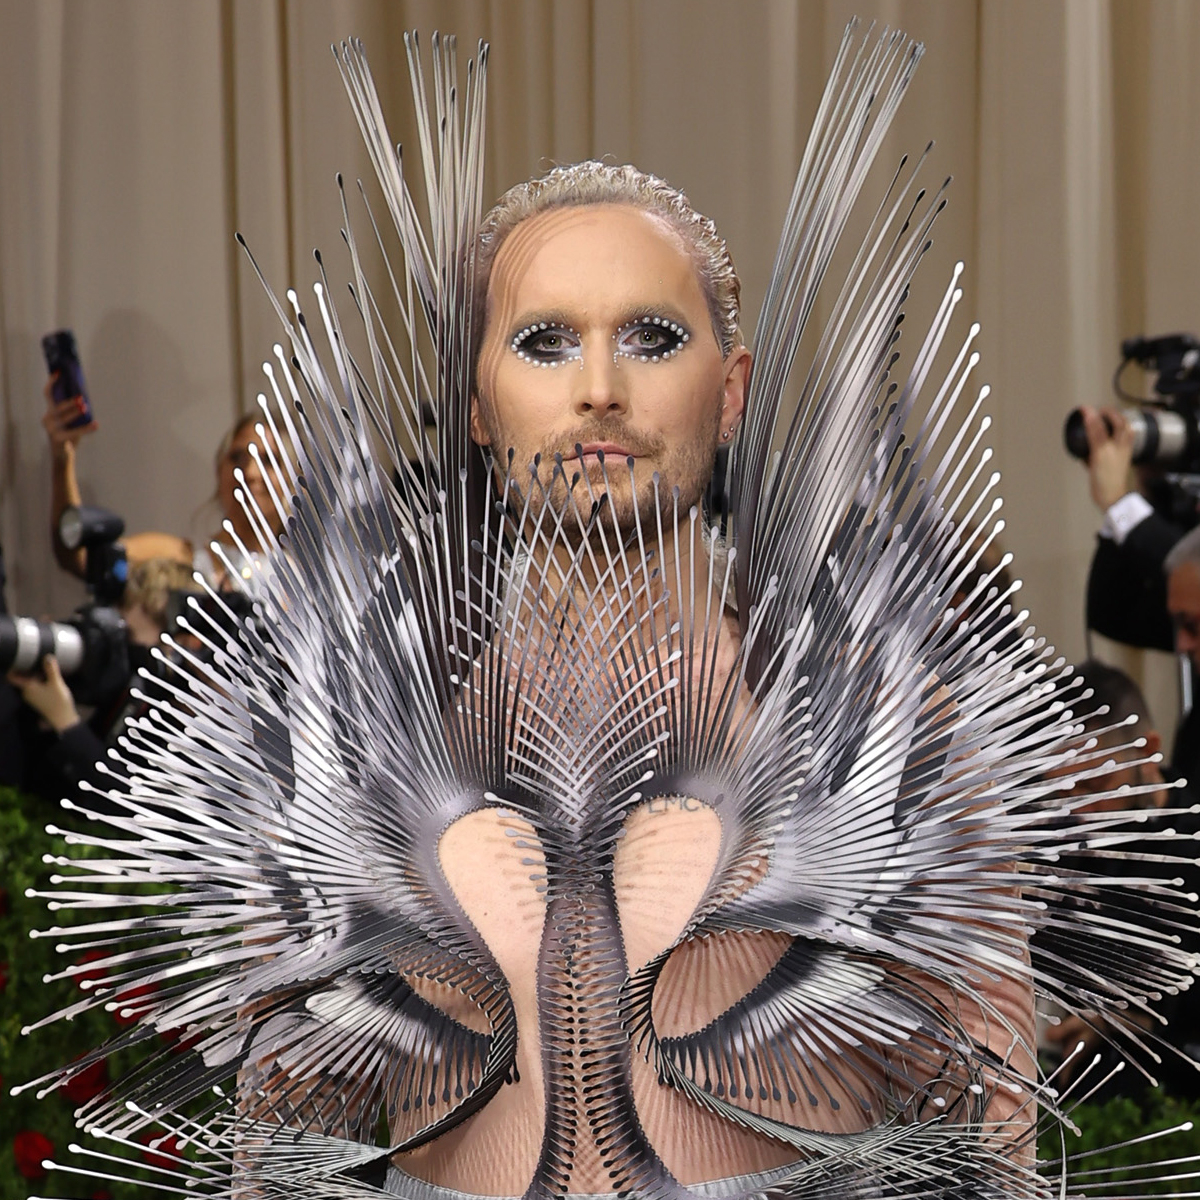 Fans confuse Jared Leto with Fredrik Robertsson at Met Gala